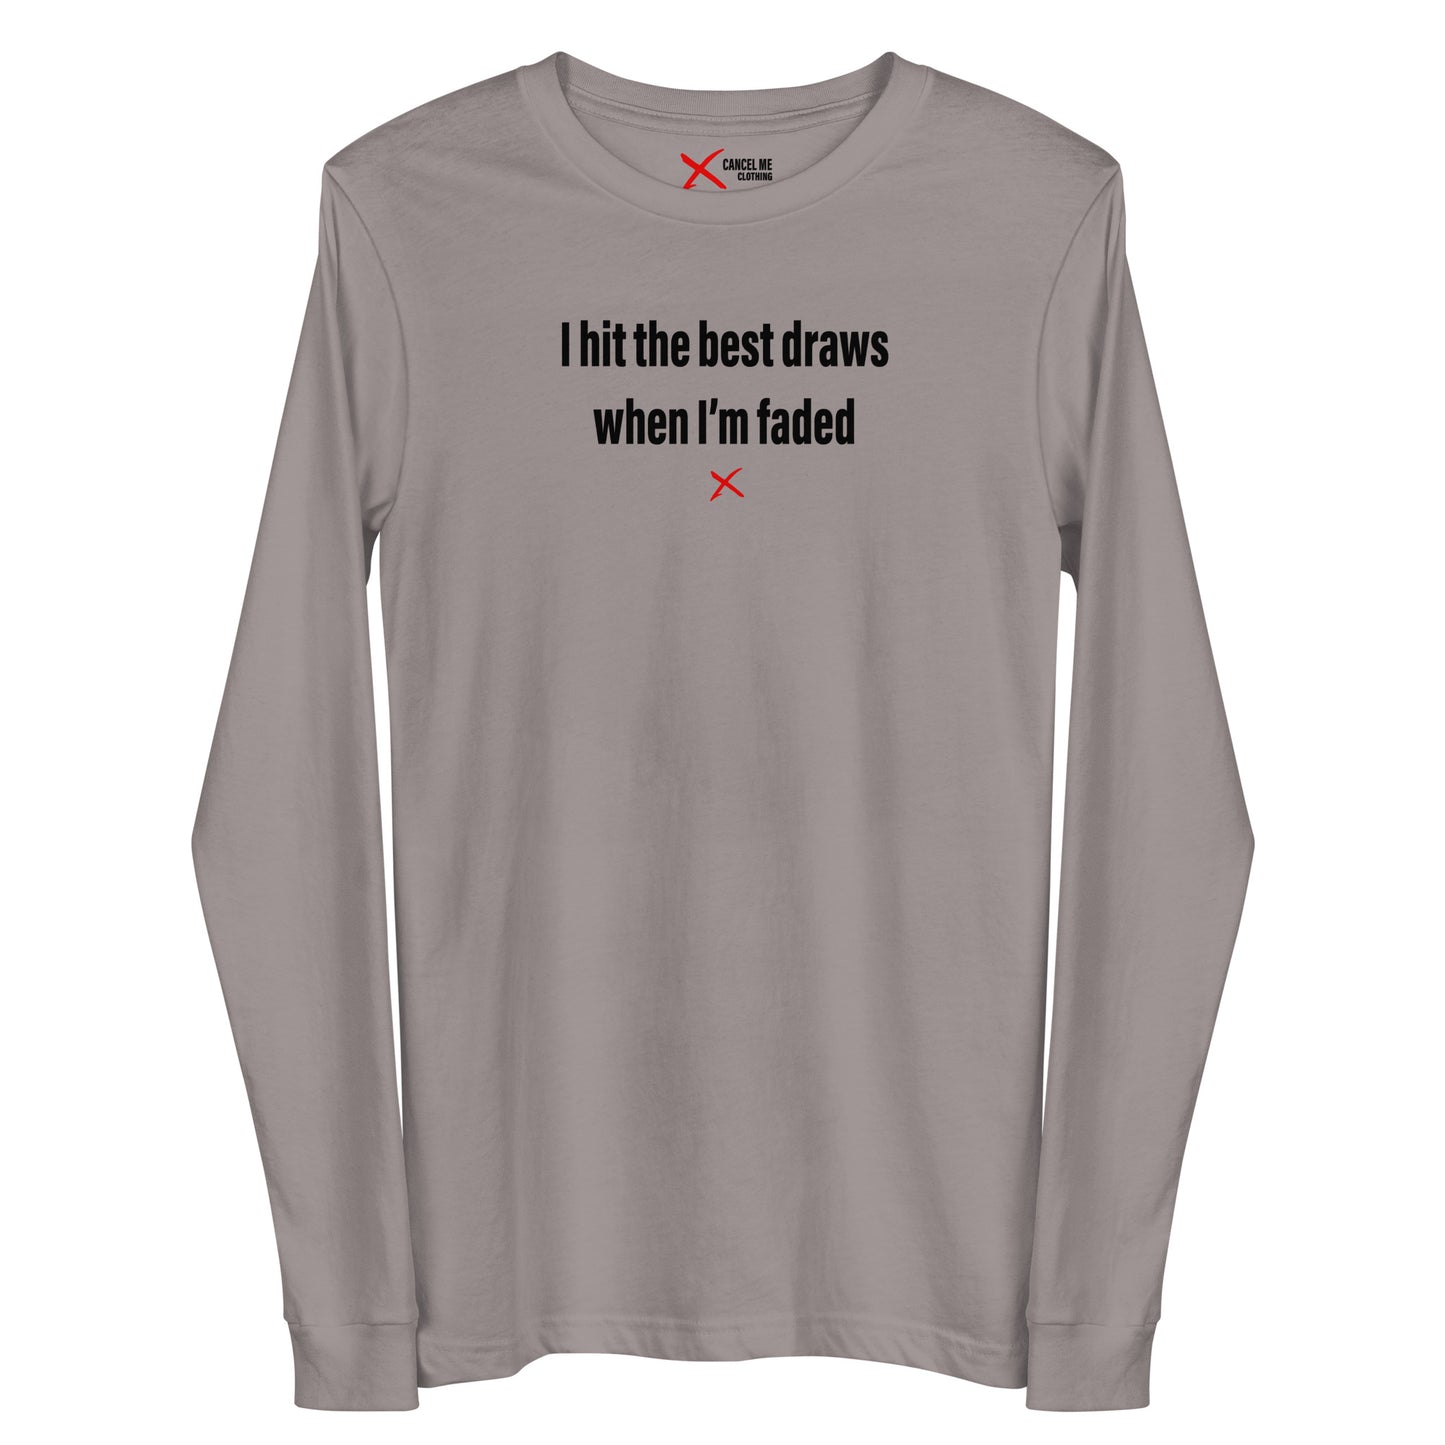 I hit the best draws when I'm faded - Longsleeve